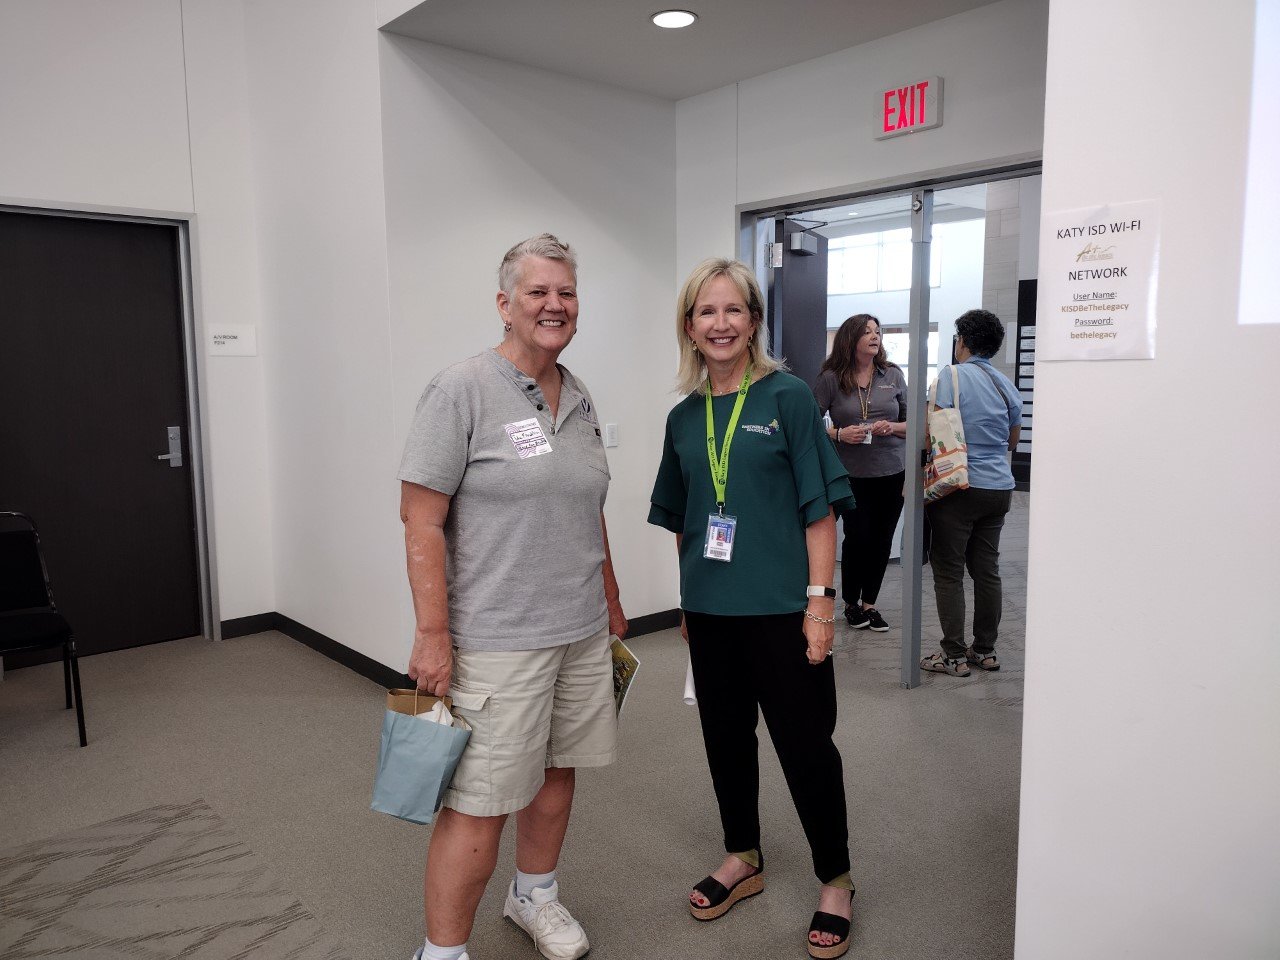 Ida Franklin of Venus Construction, a longtime Katy ISD Partner in Education partner, visits with Janet Theiss, executive director of the Katy ISD Partners in Education program, at the Business and Community Partnerships Open House.